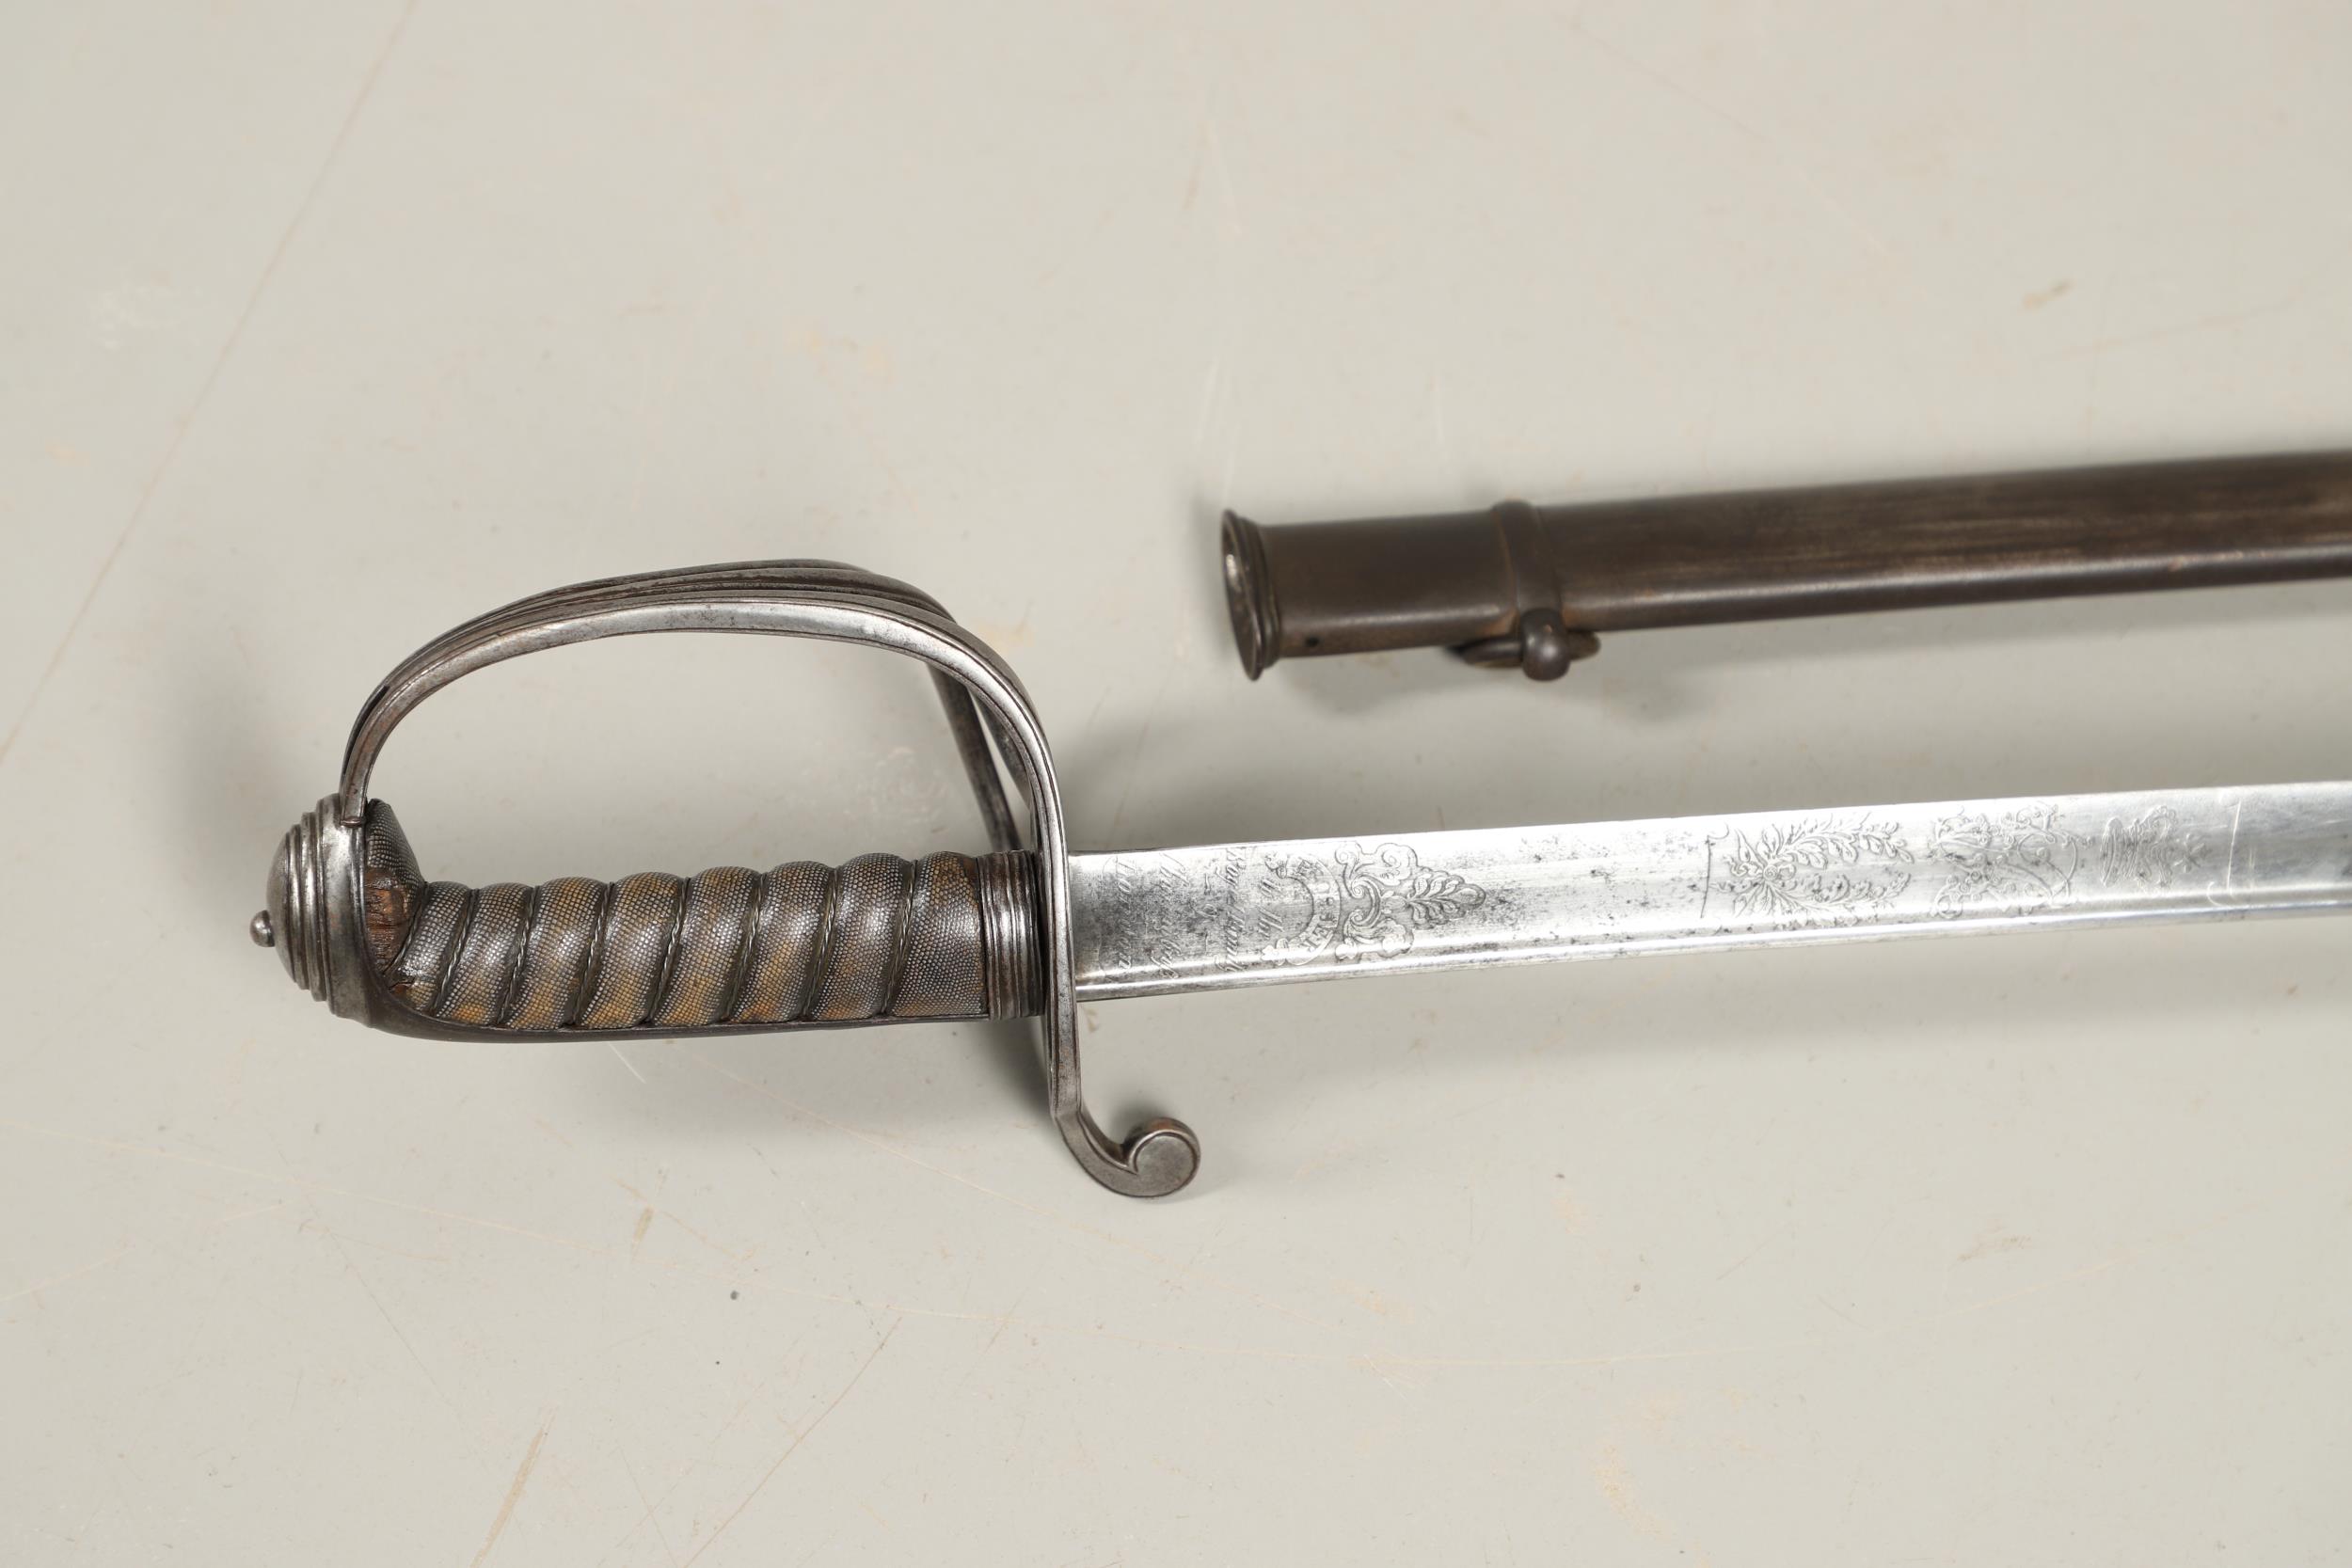 A CRIMEA PERIOD 1822 PATTERN LIGHT CAVALRY OFFICER'S SWORD AND SCABBARD. - Image 11 of 20